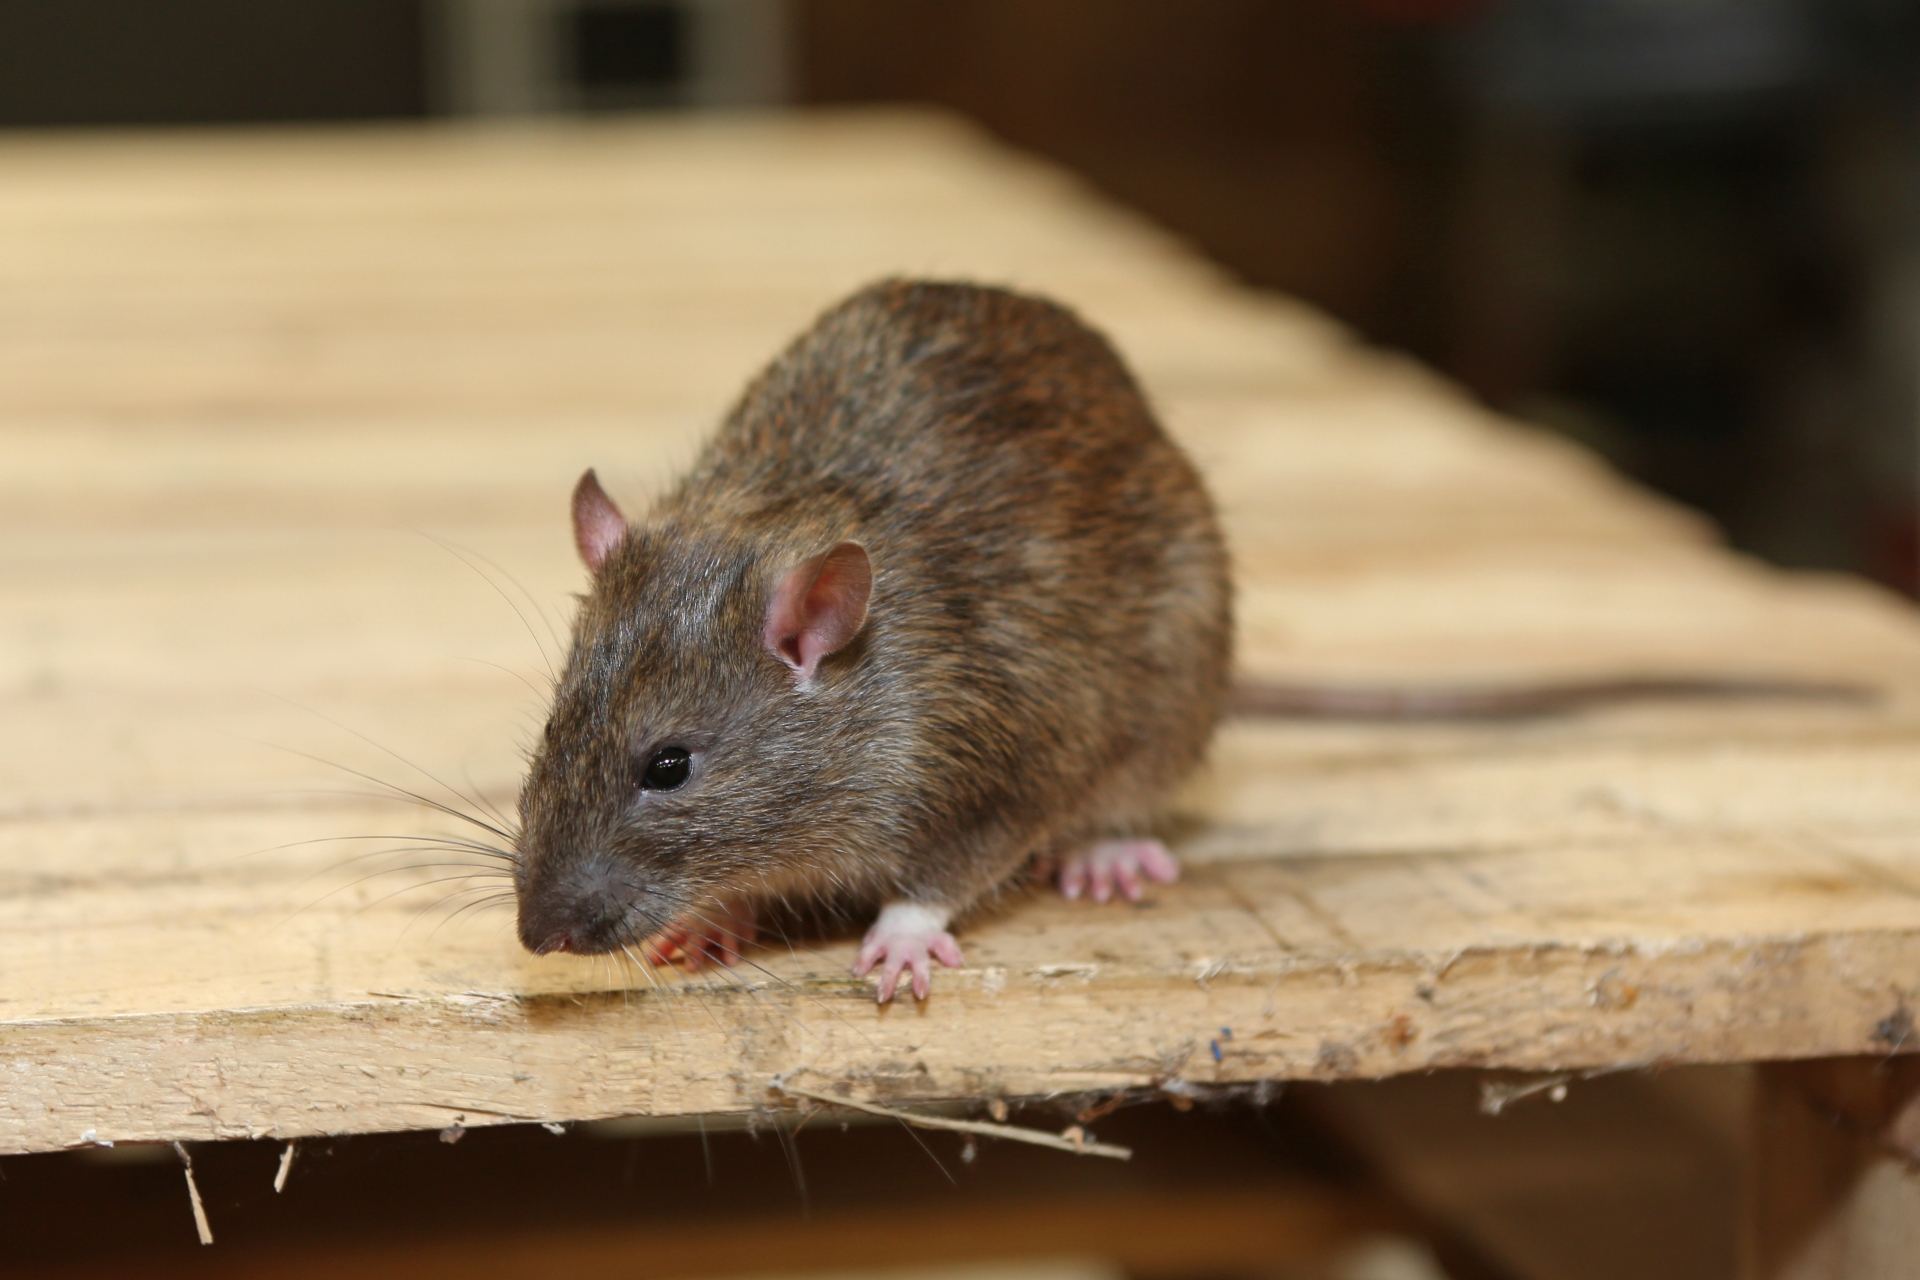 Rat extermination, Pest Control in Crystal Palace, Upper Norwood, SE19. Call Now 020 8166 9746